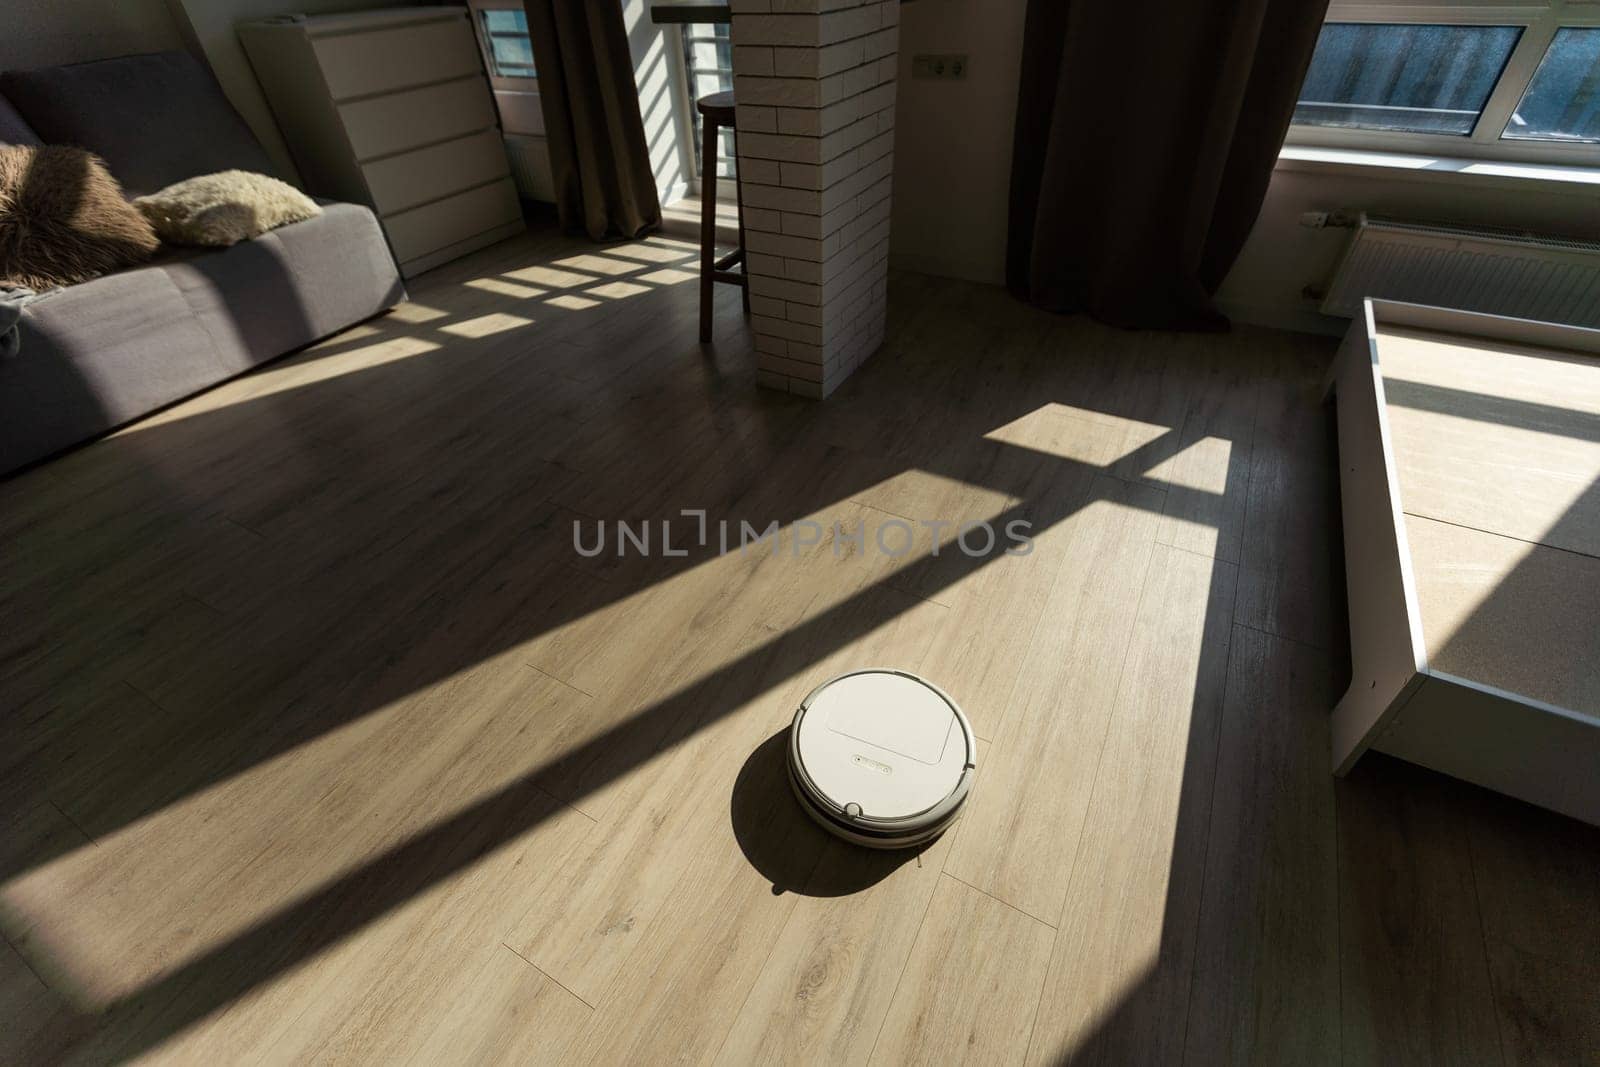 Robot vacuum cleaner on hardwood floor at sunny day.